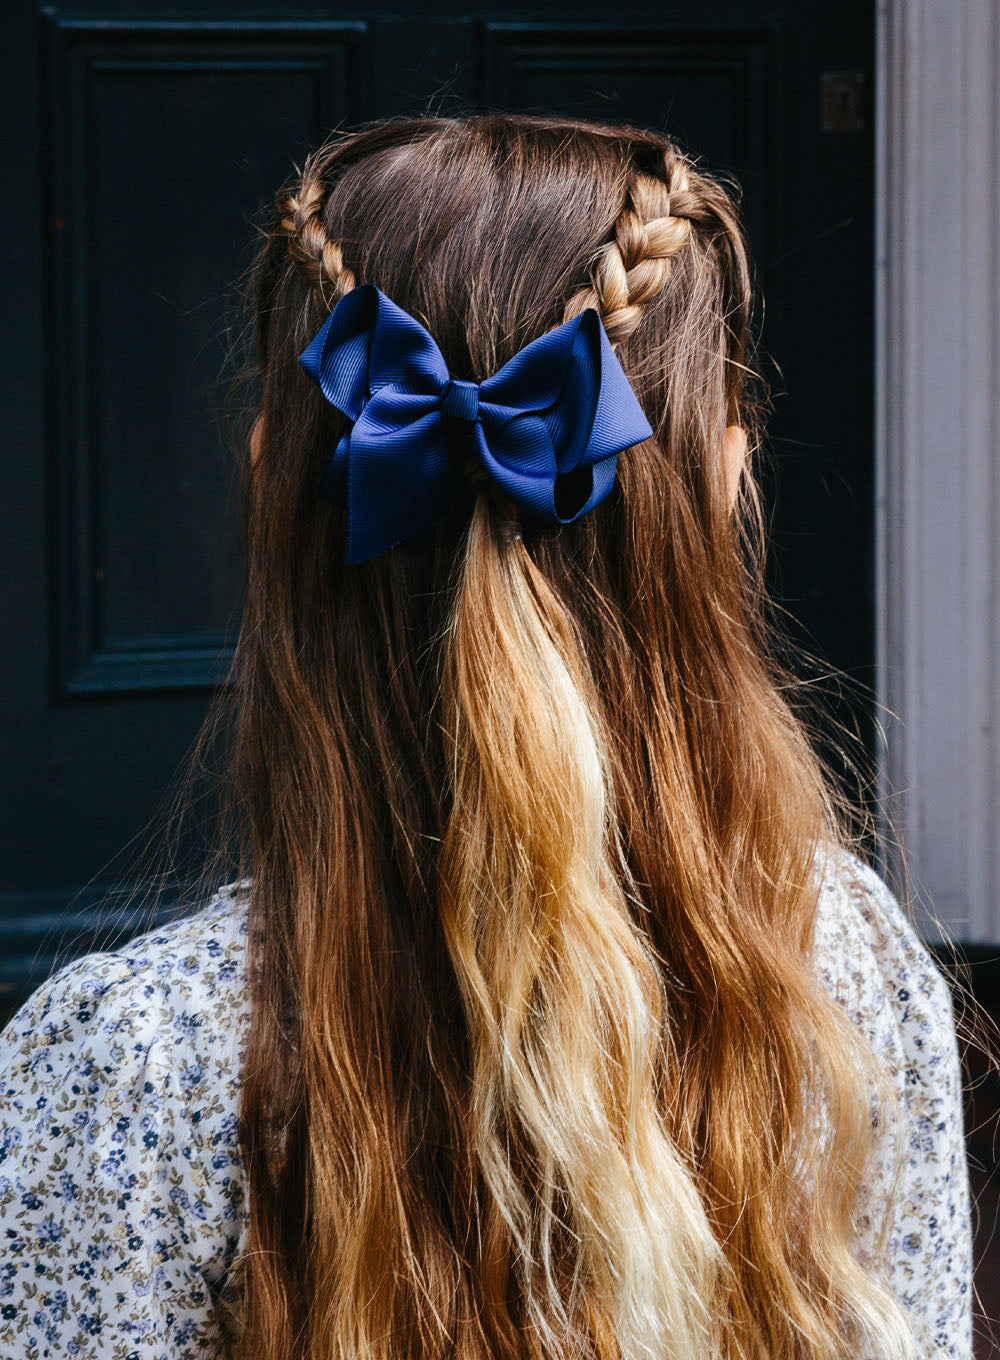 Extra Large Bow Hair Clip in Navy